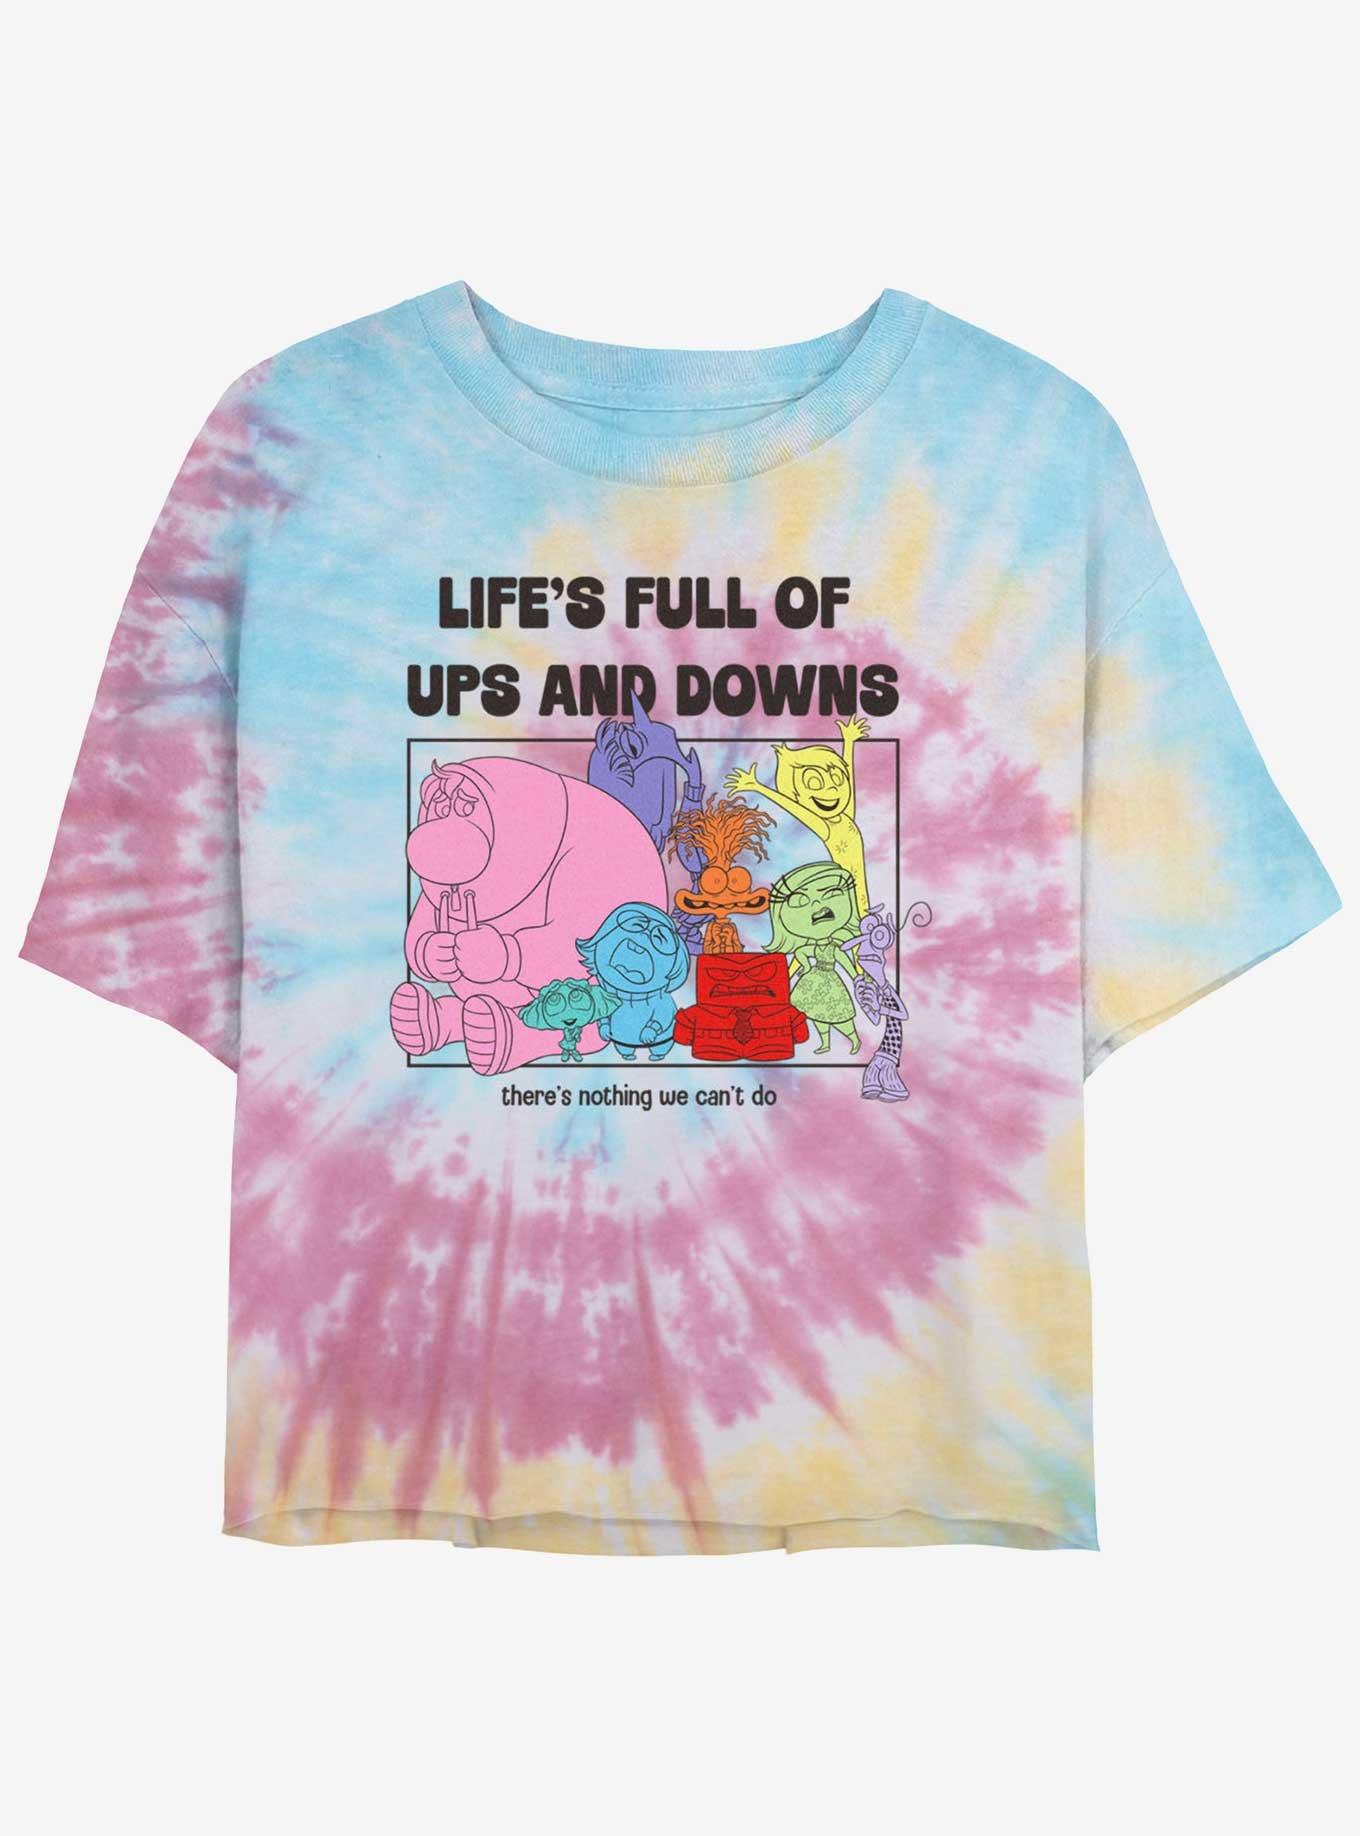 Disney Pixar Inside Out 2 Life's Full Of Ups And Downs Womens Tie-Dye Crop T-Shirt, BLUPNKLY, hi-res